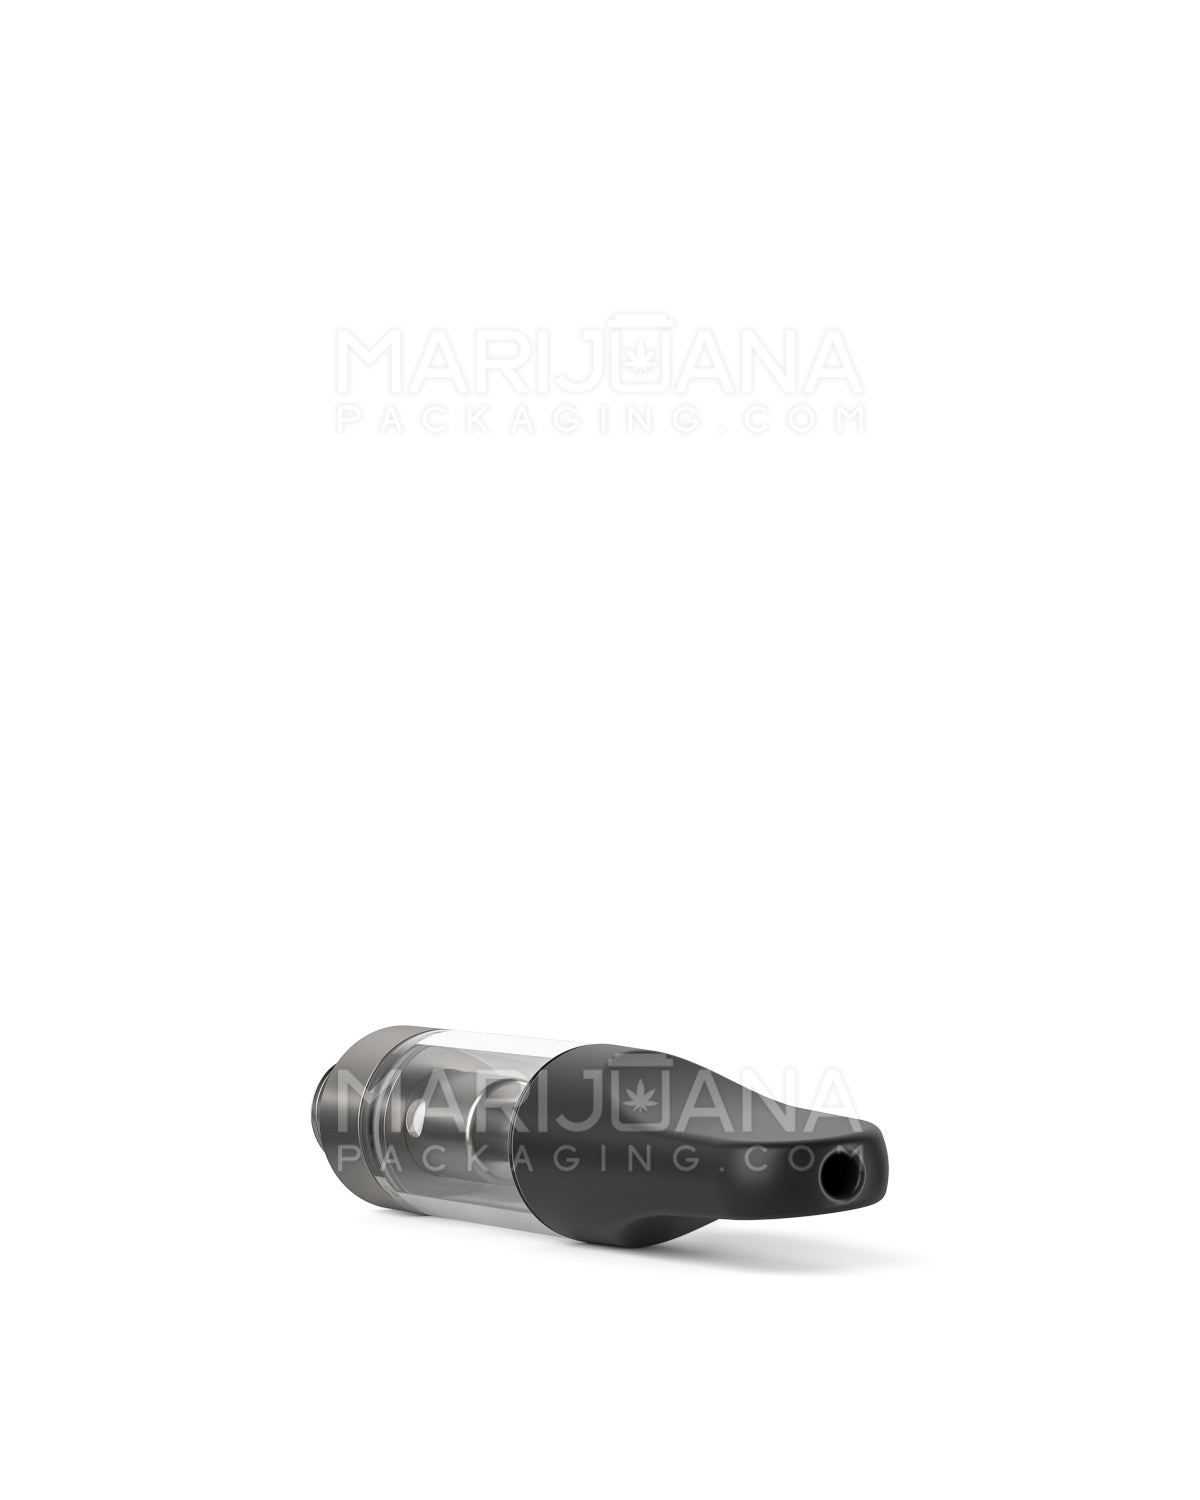 CCELL | Liquid6 Reactor Glass Vape Cartridge with Black Plastic Mouthpiece | 0.5mL - Screw On - 100 Count - 7